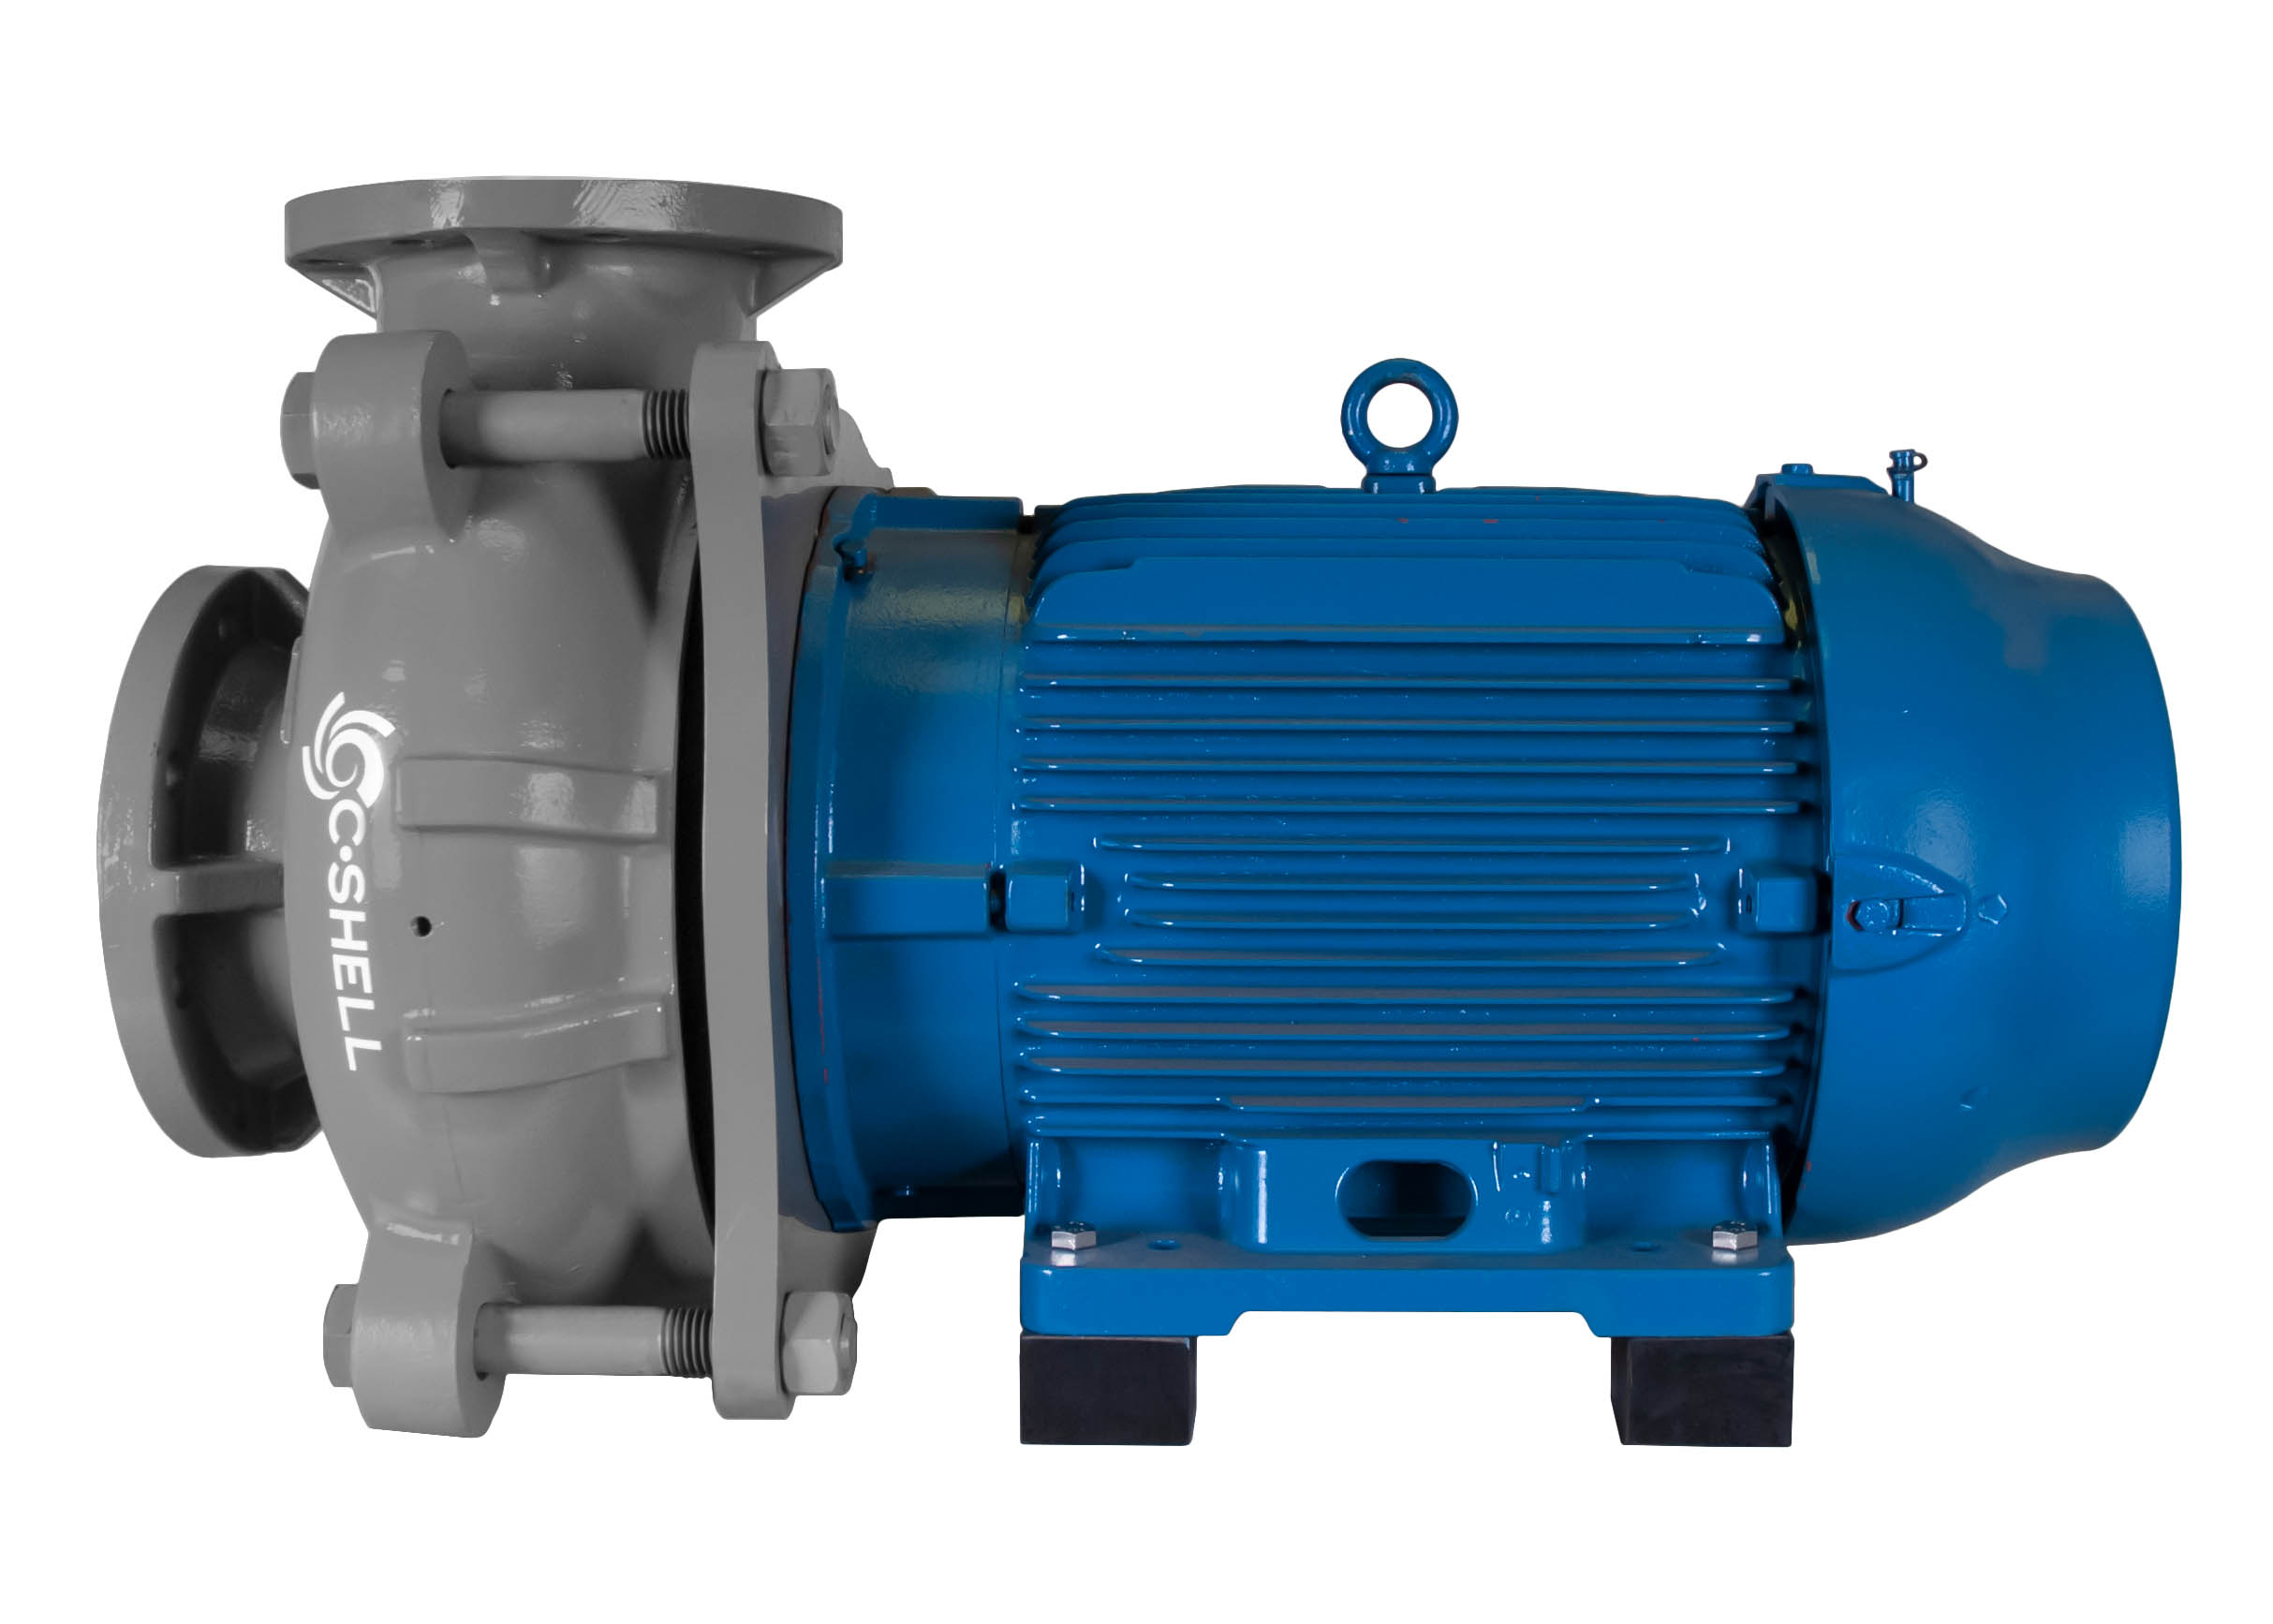 C-Shell 6x5-11 Pump with blue WEG Motor right side view